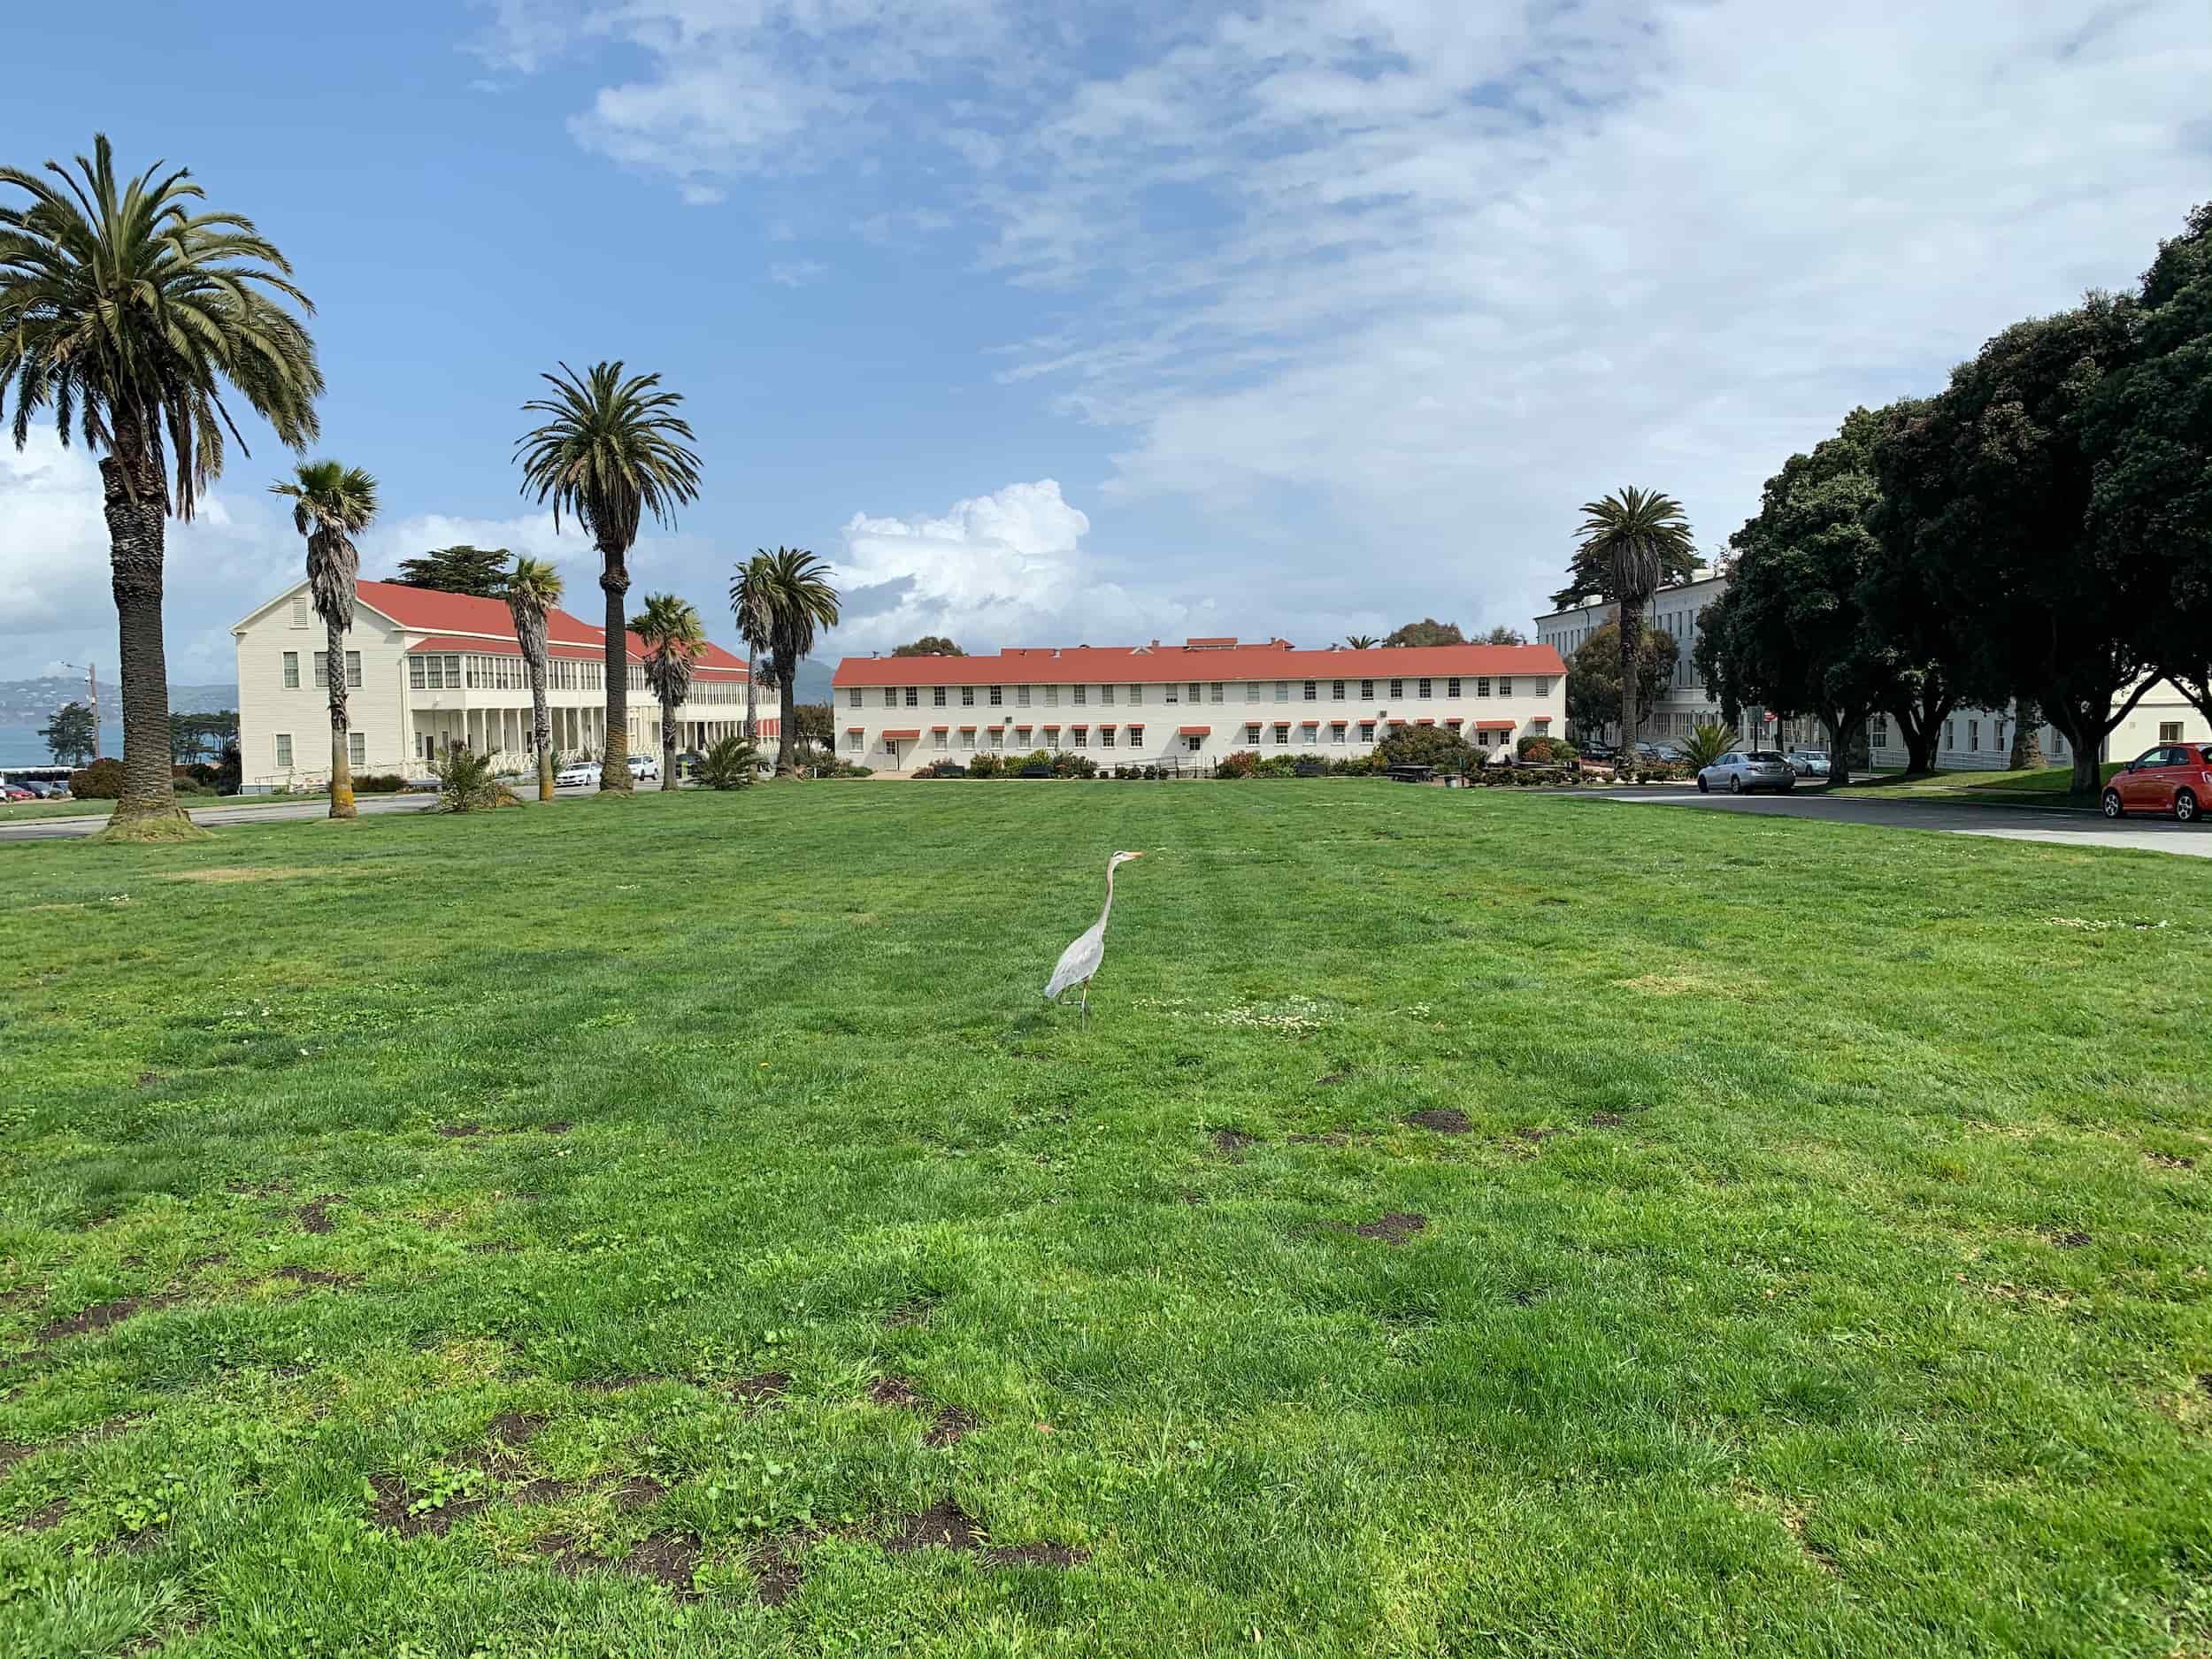 The large lawn at the Civil War Parade Ground in the Presidio, with a Blue Heron.